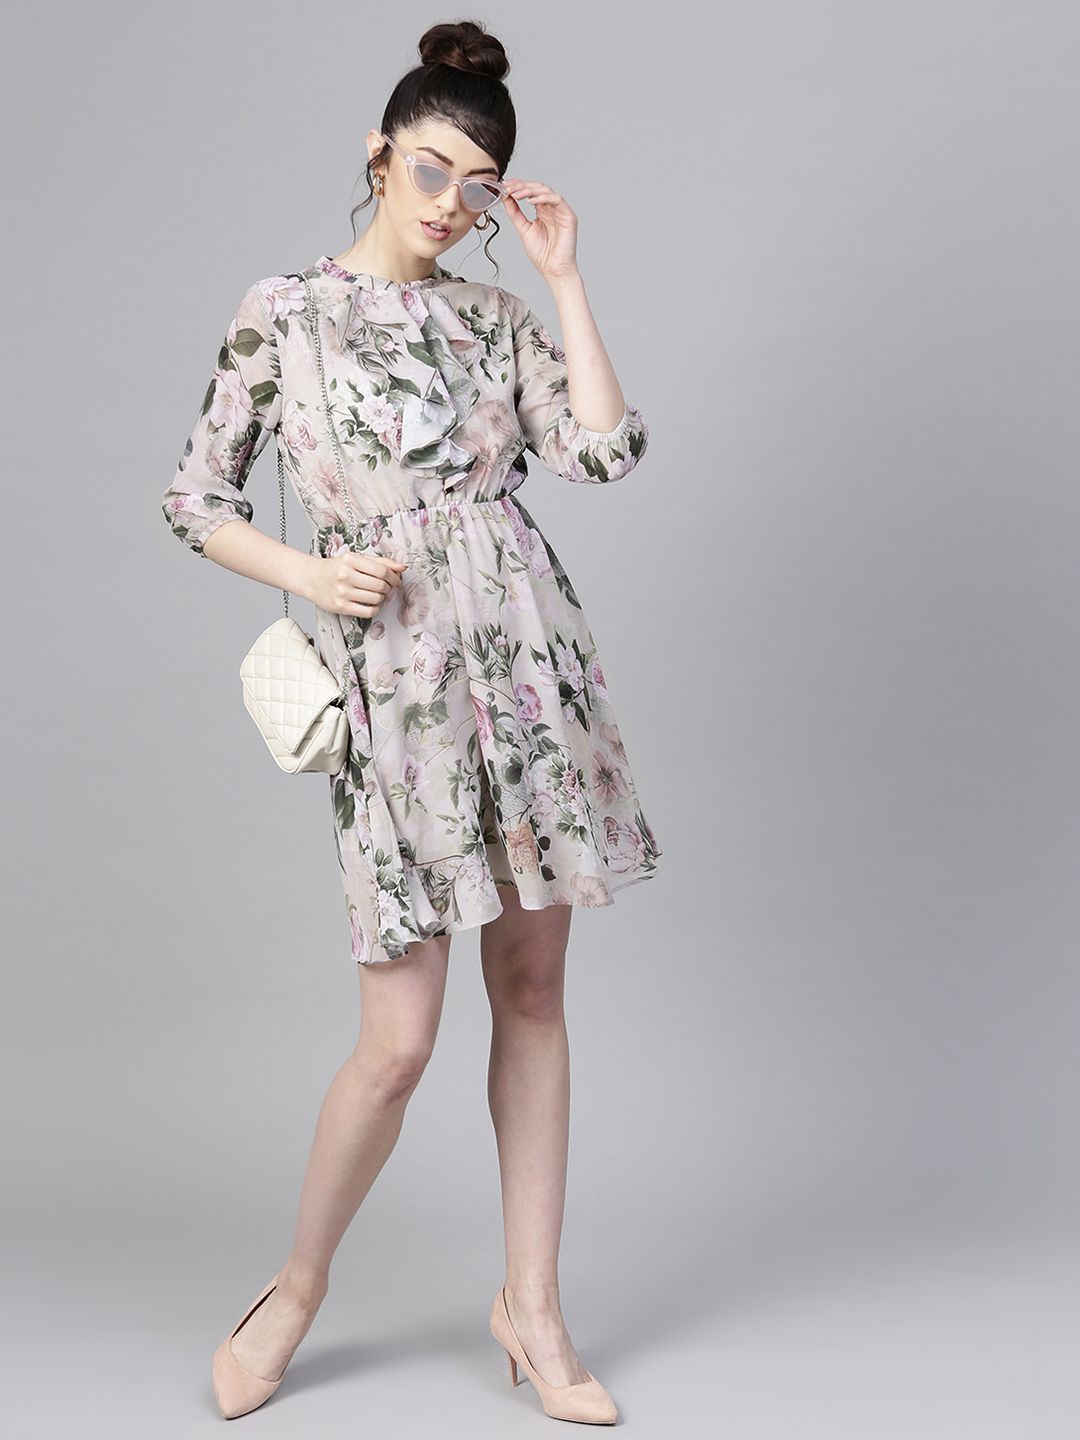 SASSAFRAS Grey & Green Floral Print Fit and Flare Dress Price in India